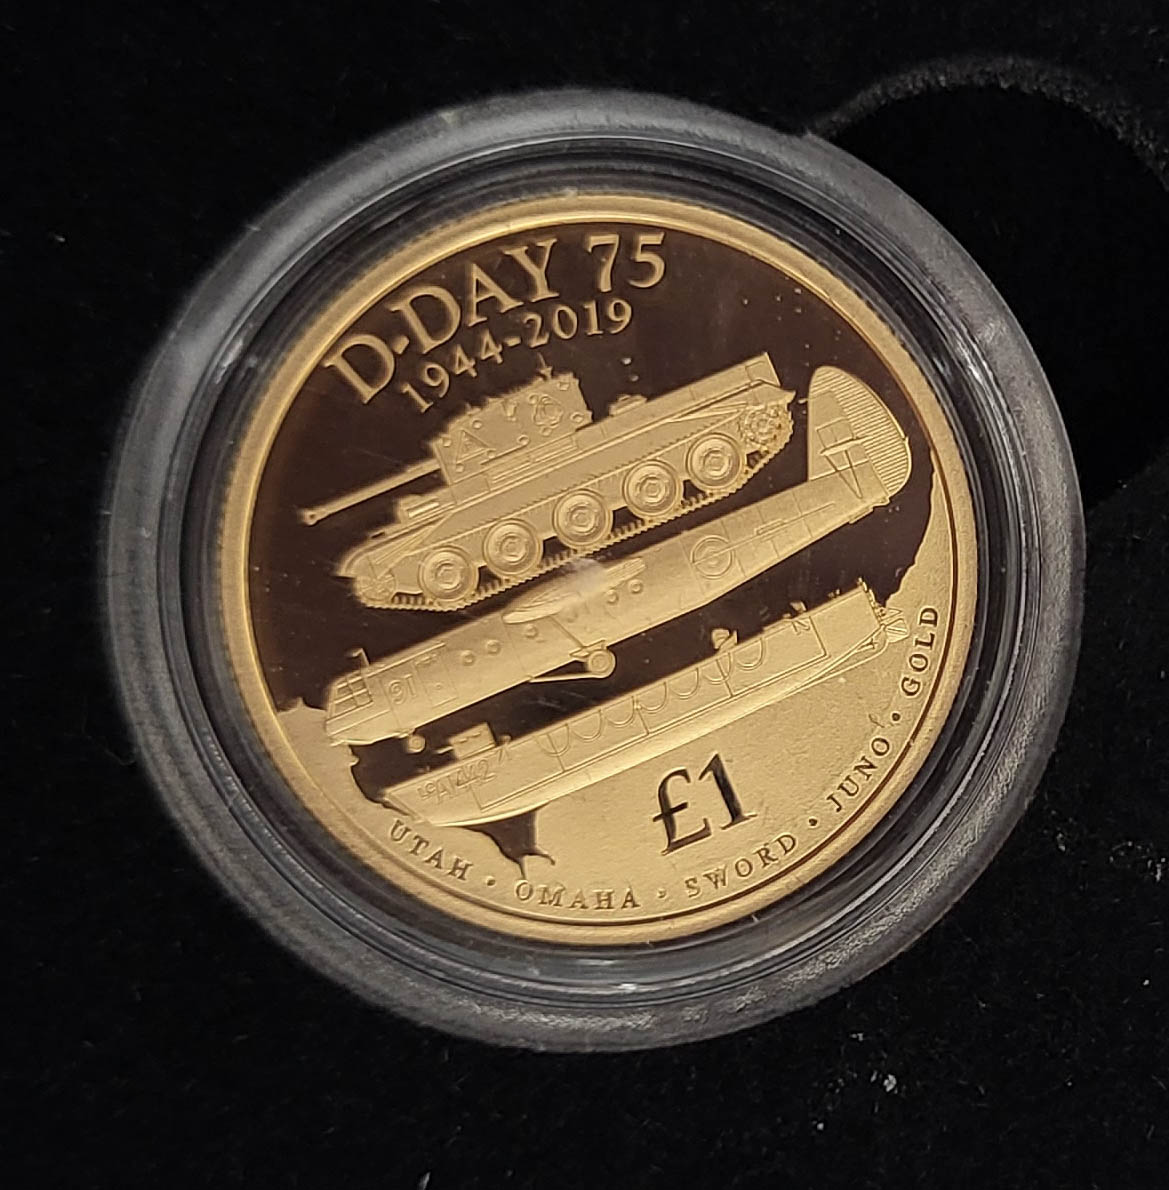 A 22CT GOLD 'D-DAY LANDINGS ' FULL SOVEREIGN PROOF COIN, DATED 2019 With Cromwell tank MK 1V, - Image 2 of 5